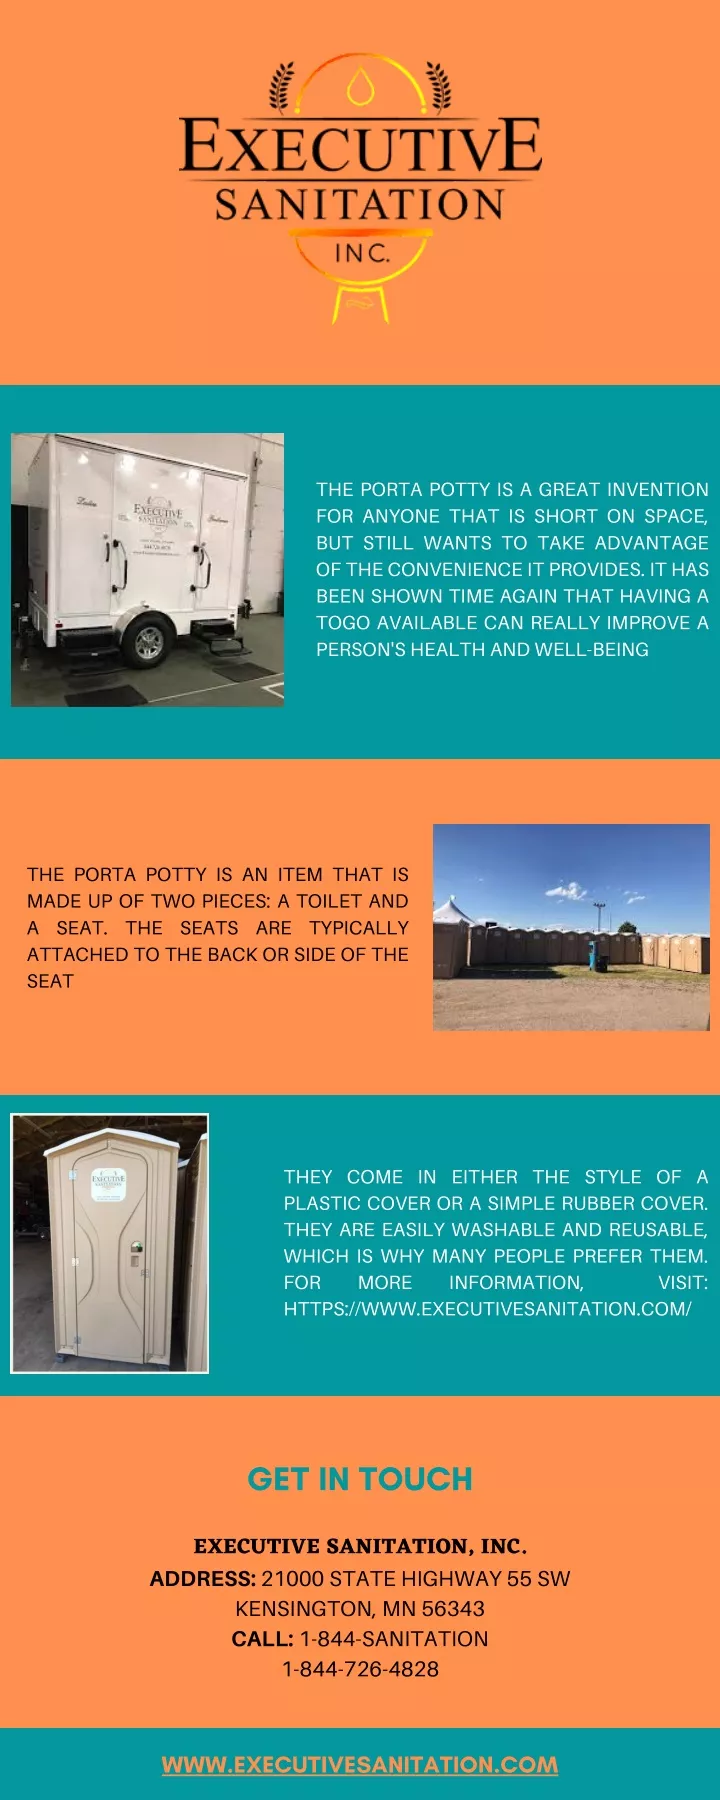 the porta potty is a great invention